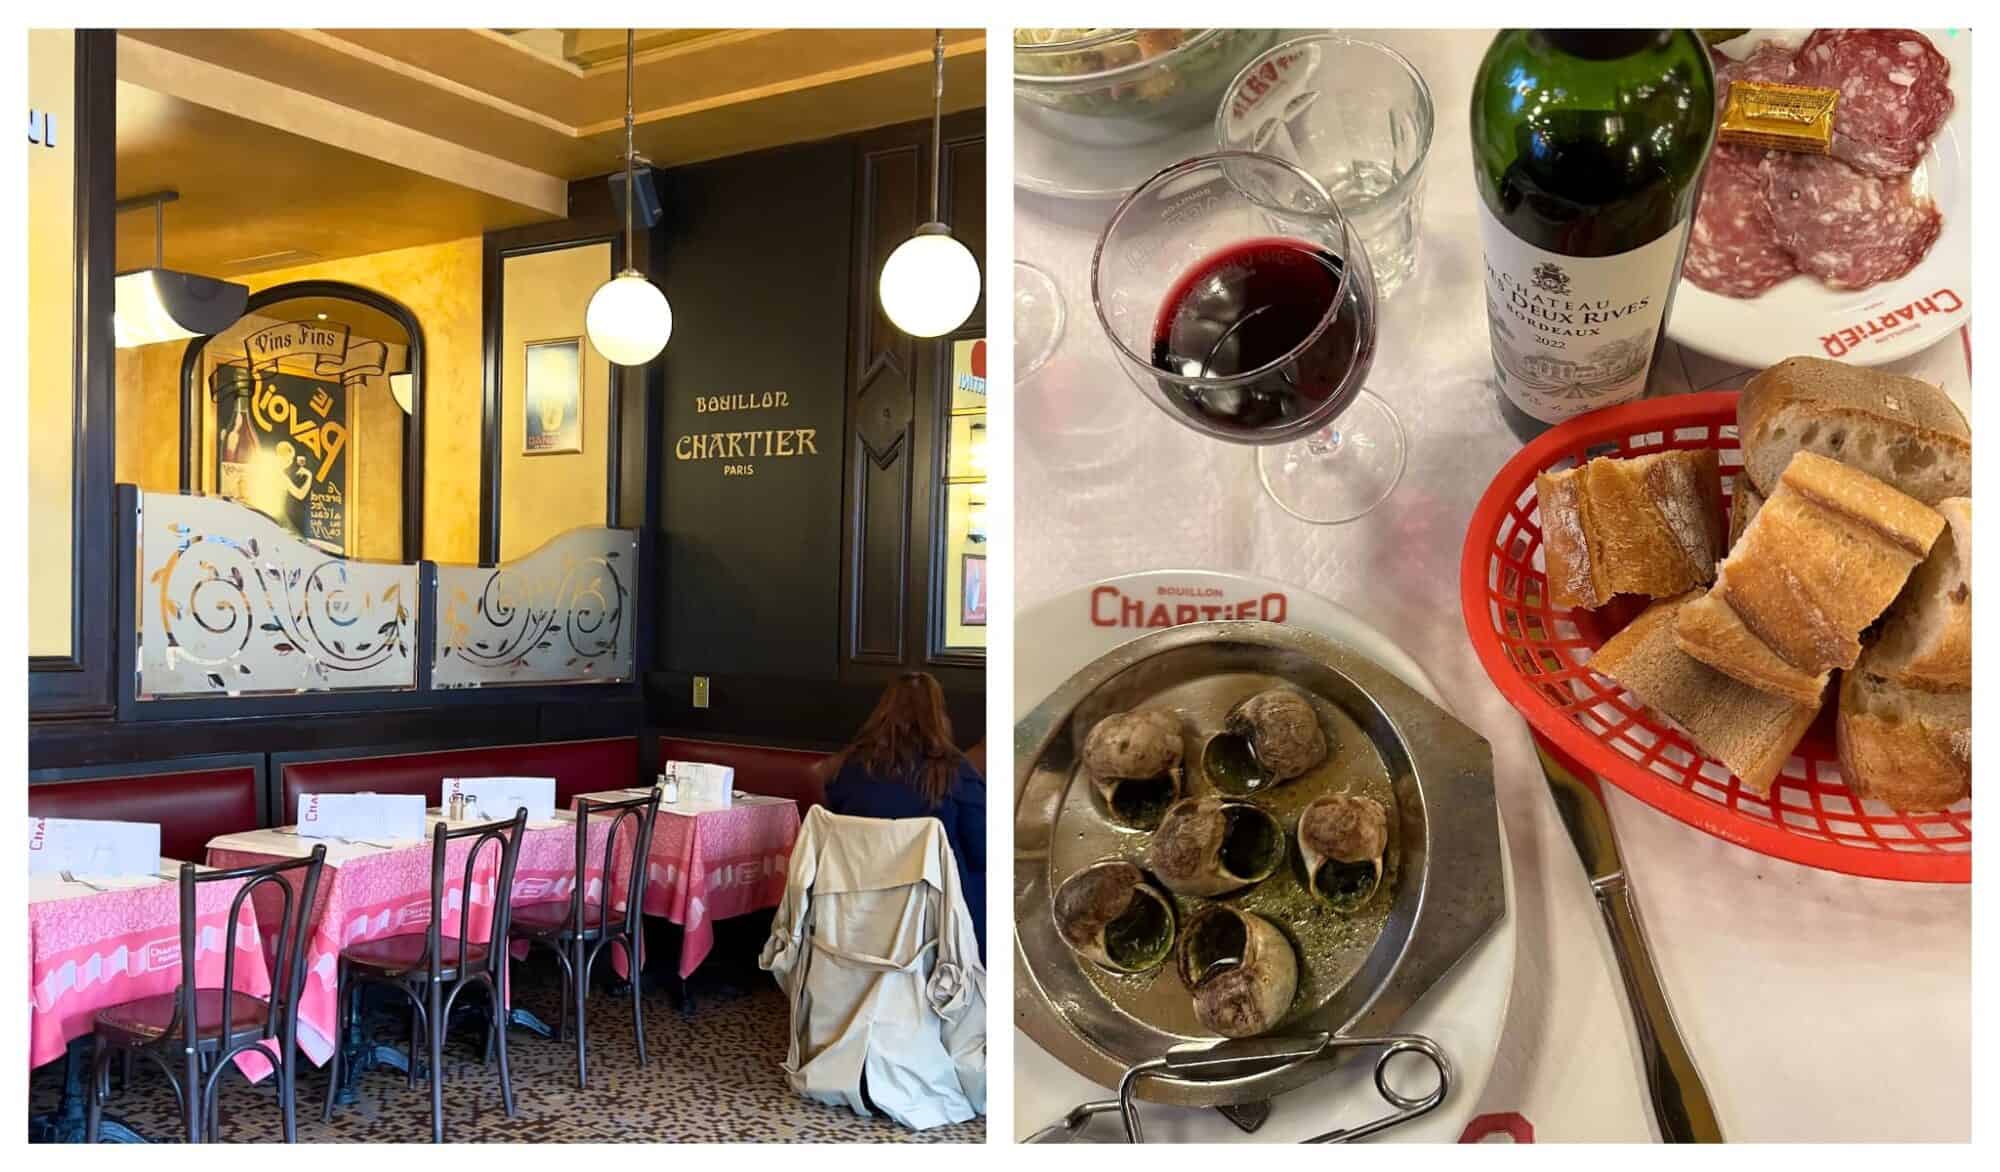 Left: the dining room of Bouillon Chartier Gare de l'Est with a yellow and wood paneled walls, red table cloth covered with white paper tablecloth and the back of diner's head; right: a table at the same restaurant with escargots; a glass of red wine, bread basket, bottle of bordeaux wine, a plate of charcuterie with butter and cornichon, and the edge of a salad bowl.